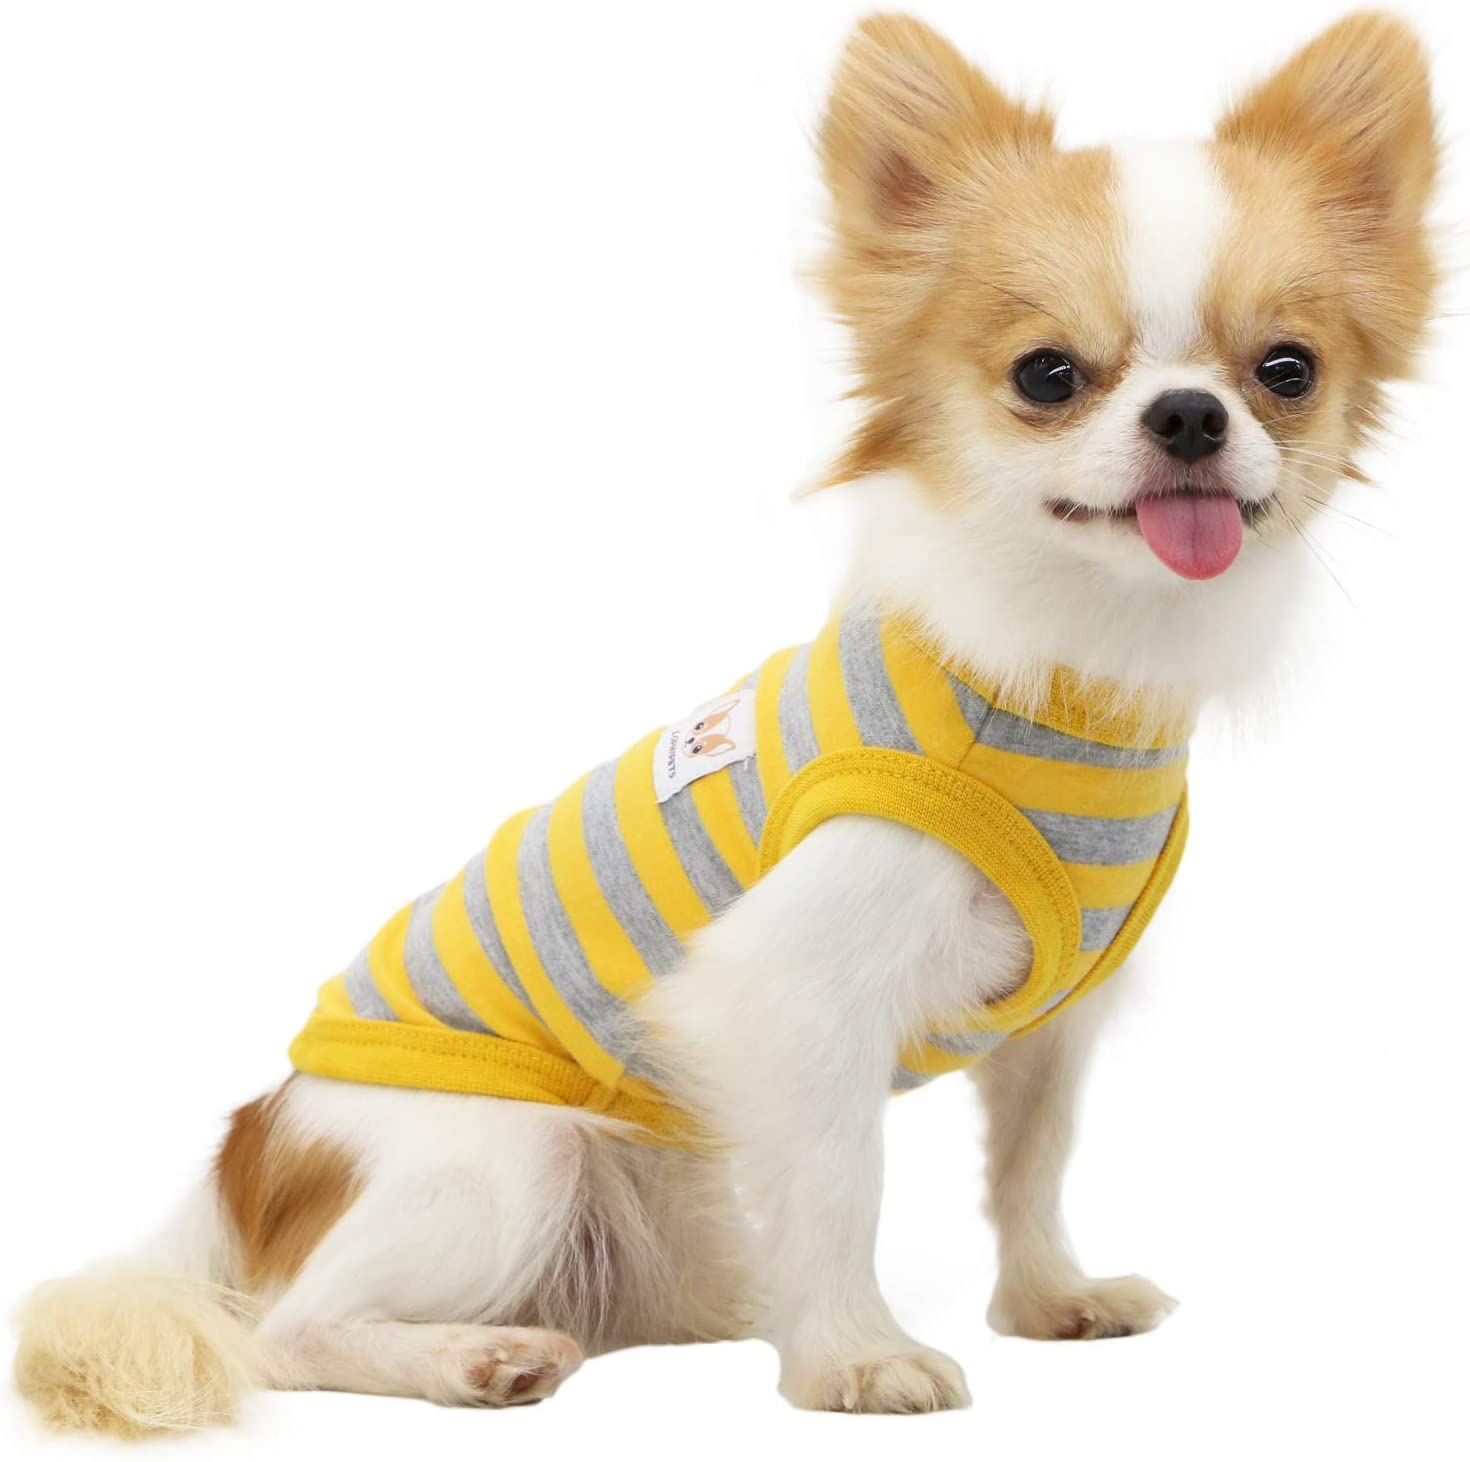 LOPHIPETS 100% Cotton Striped Dog Shirts for Small Dogs Chihuahua Puppy Clothes Tank Vest-Yellow and Gray Strips/Xs